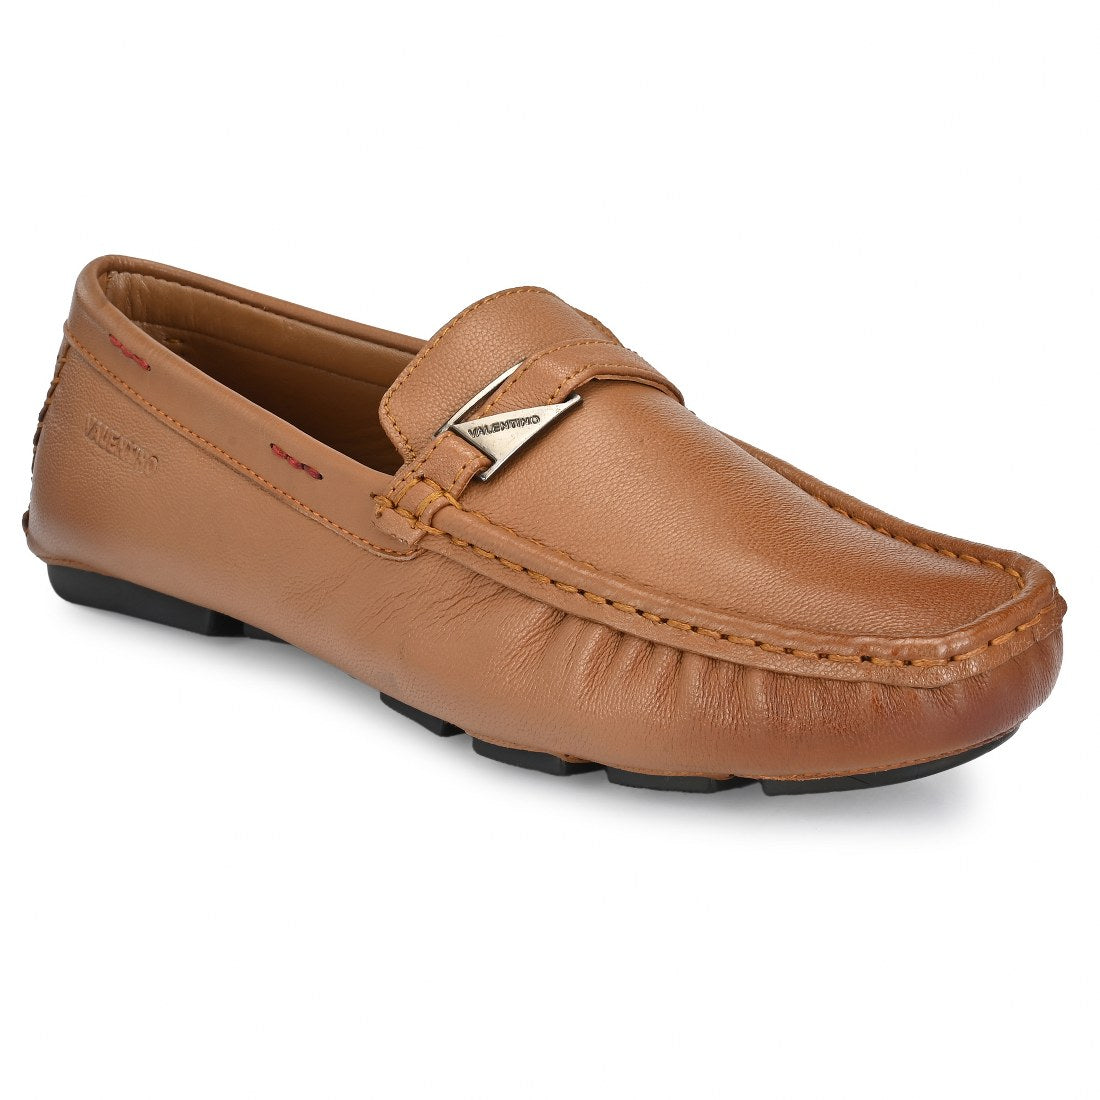 EMPORIO-26 MEN LEATHER TAN CASUAL SLIP ON DRIVING